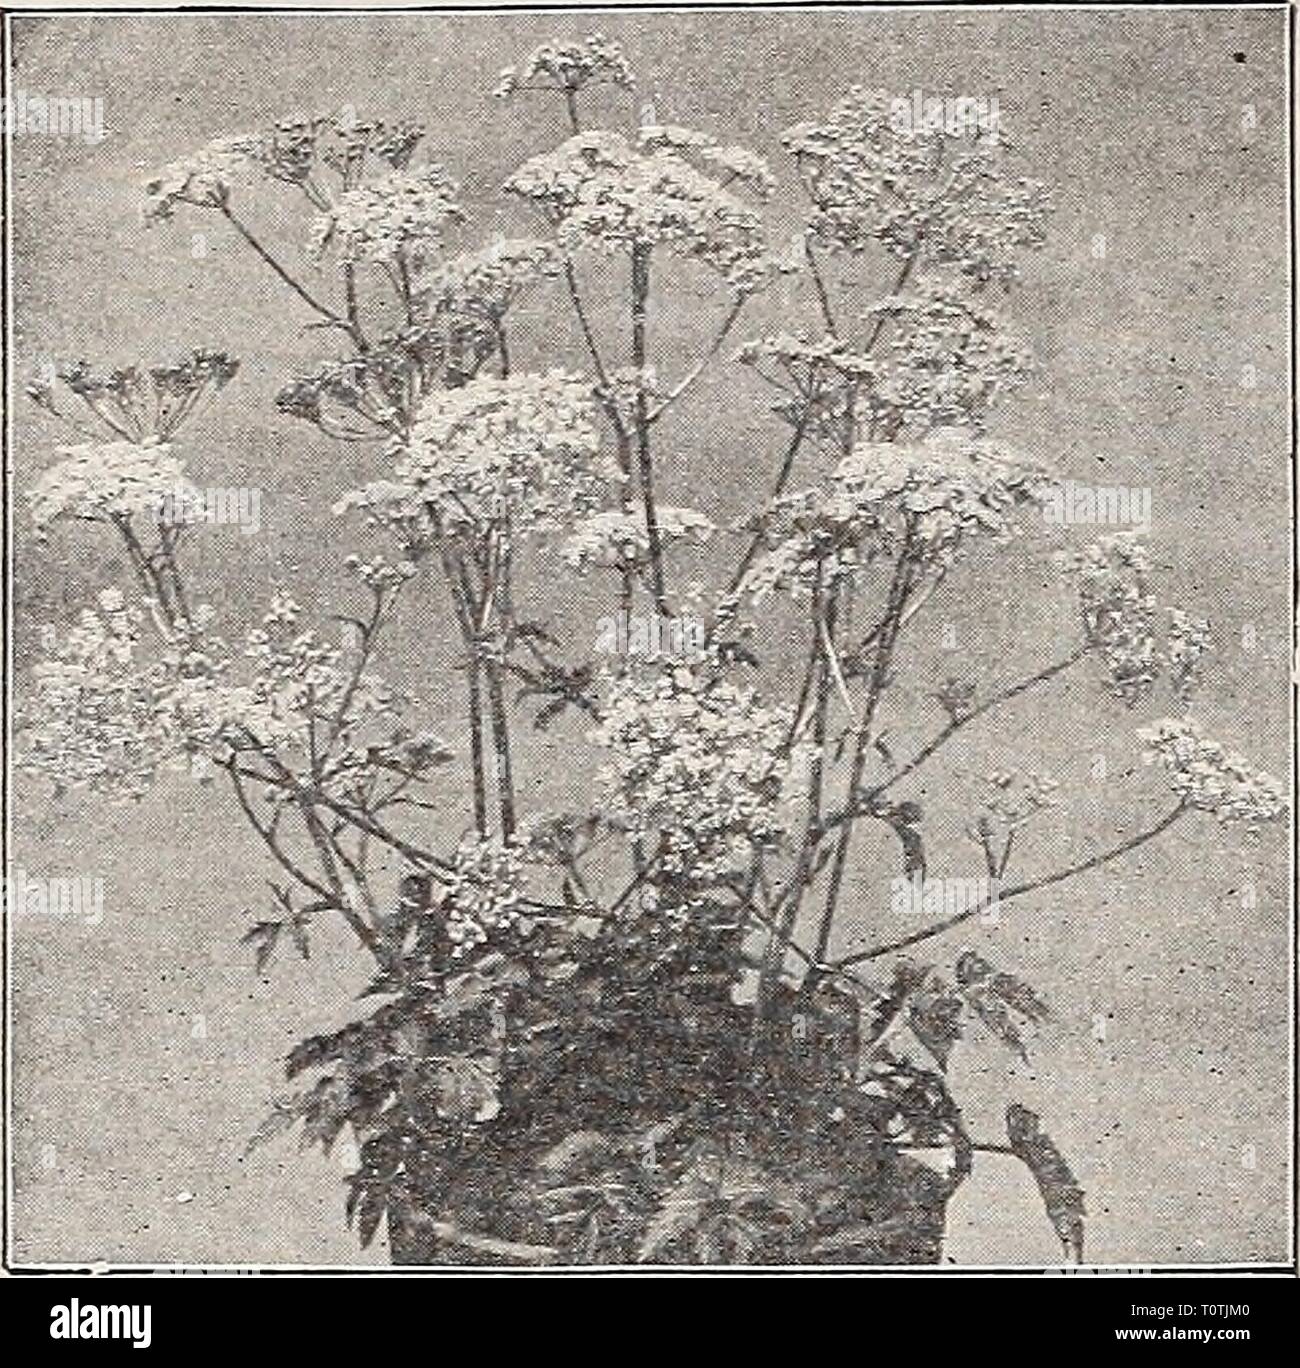 Dreer's 1907 garden book (1907) Dreer's 1907 garden book  dreers1907garden1907henr Year: 1907  156 HfflRTADREER'-PHILADELPHIA^A- NEW«-RARE PLANTS    Pimpinella Magna Rosha. MEW MONTBRETIAS. The three varieties offered below are grand additions to our list of summer-flowering bulbs; quite hardy with careful protection. America. Not an extra large flower, but opening many of its blos- soms at the same time, which makes it very attractive; color deep orange-yellow with dark red centre. Geo. Davison. Flower stems 3 feet or more high ; the flowers, which are very large and open out flat, are neatly Stock Photo